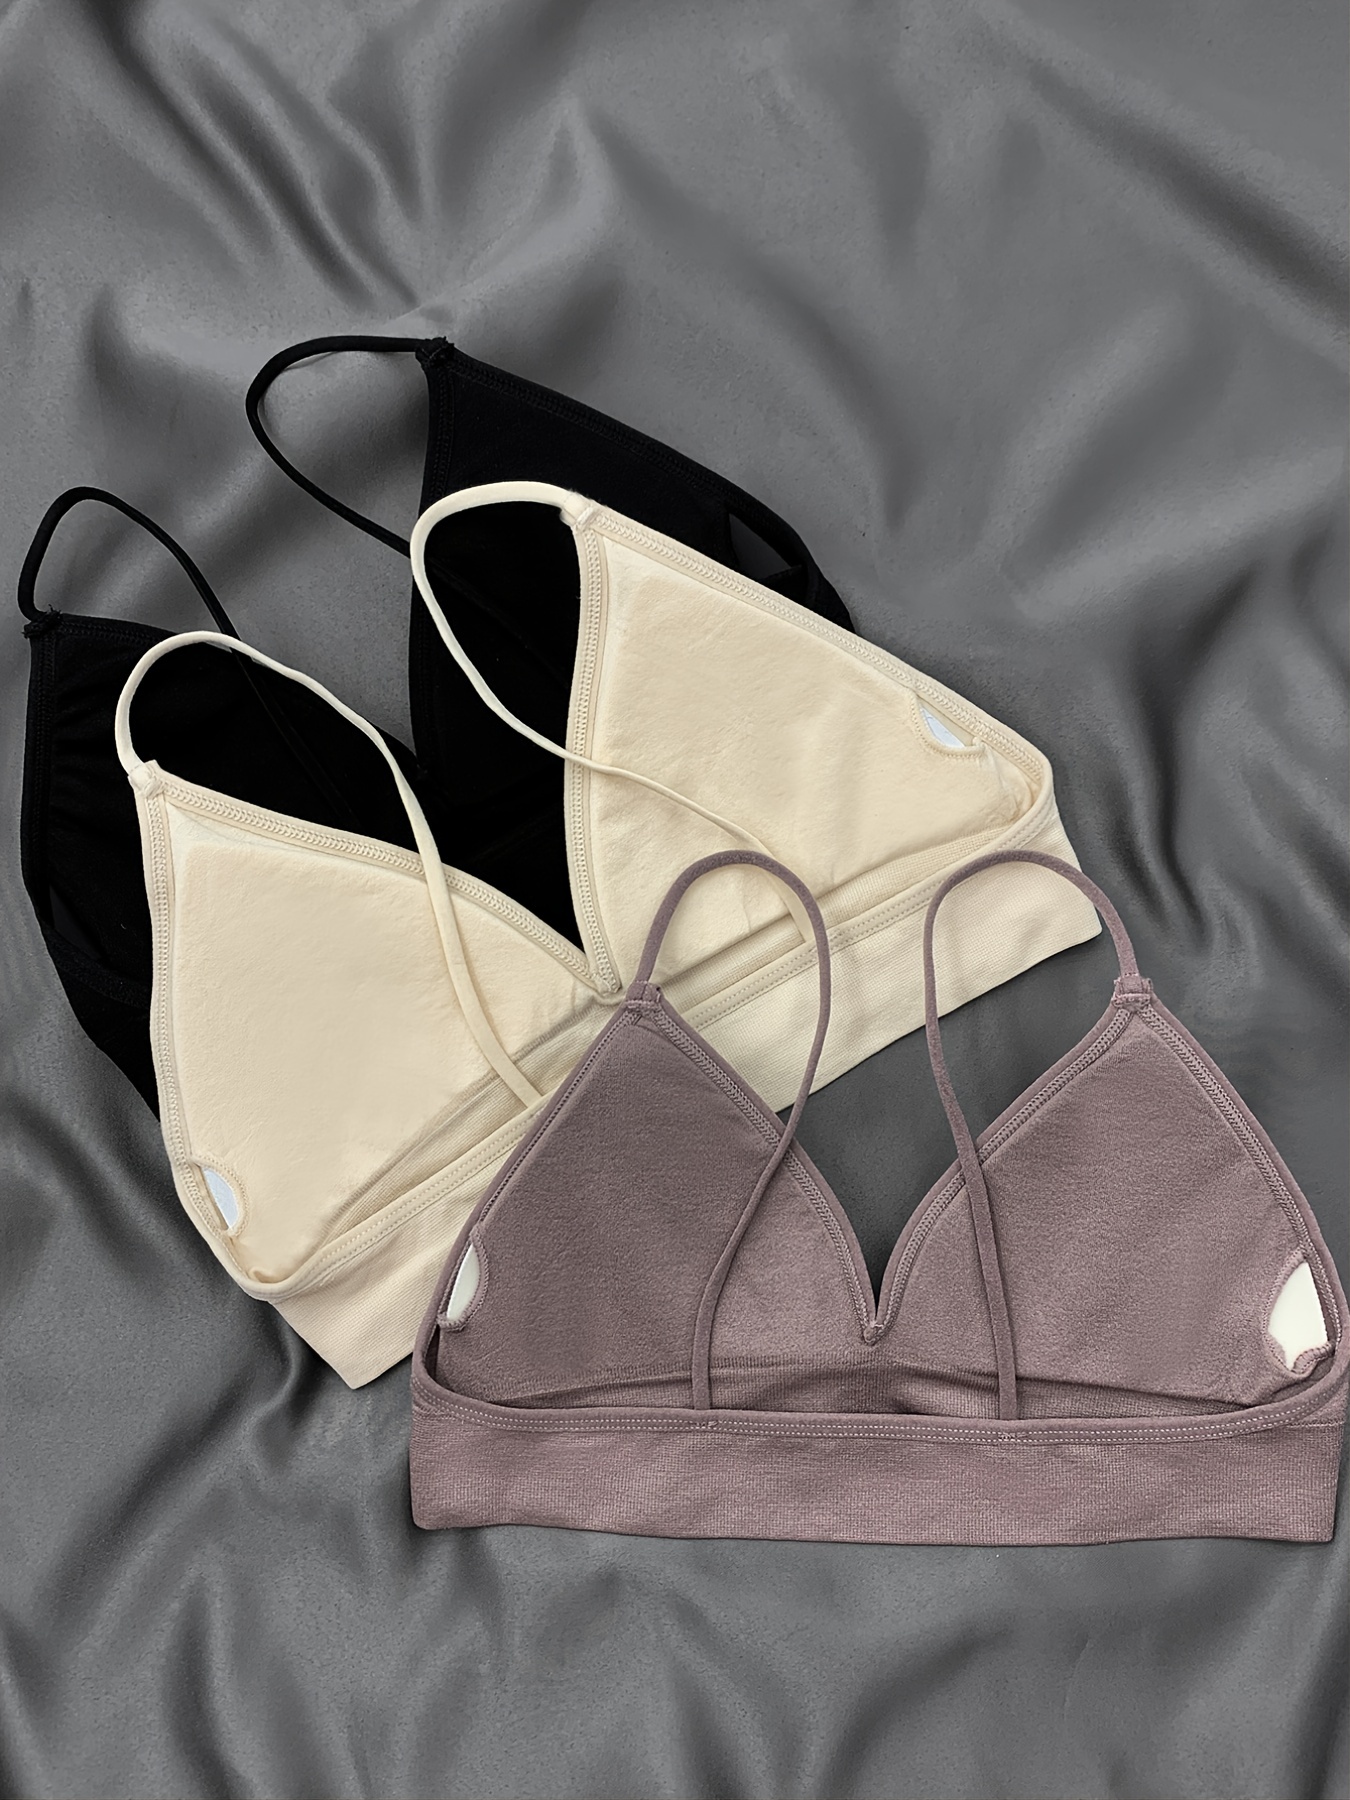 Triangle Cups Sports Bras Removable Padded Push Wireless Bra